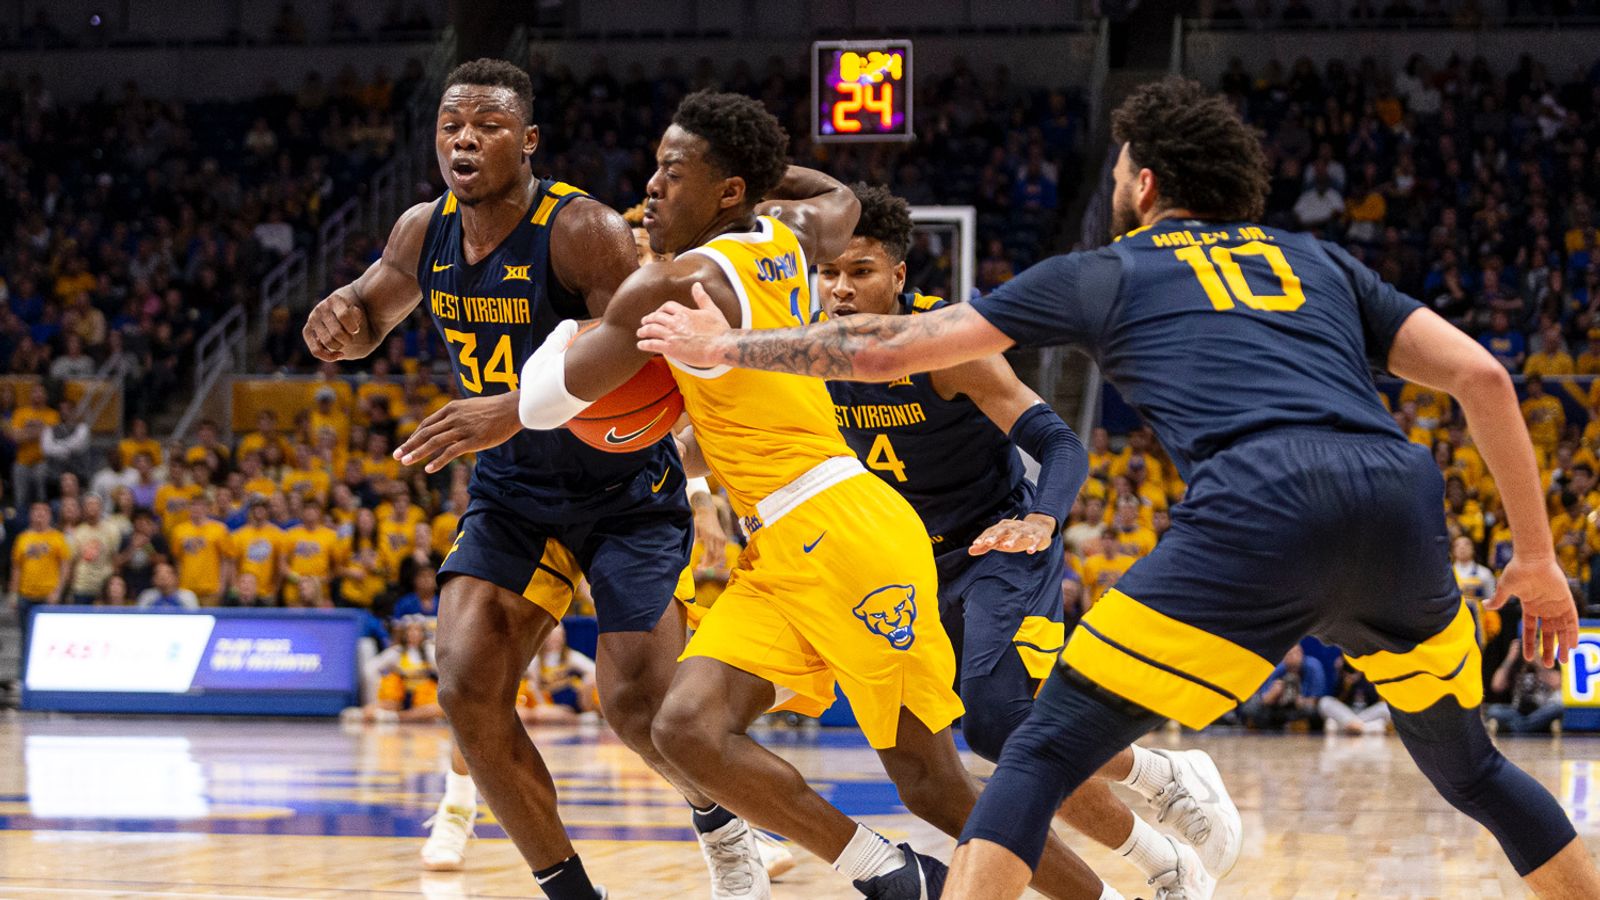 Pitt, West Virginia hoops extended two years